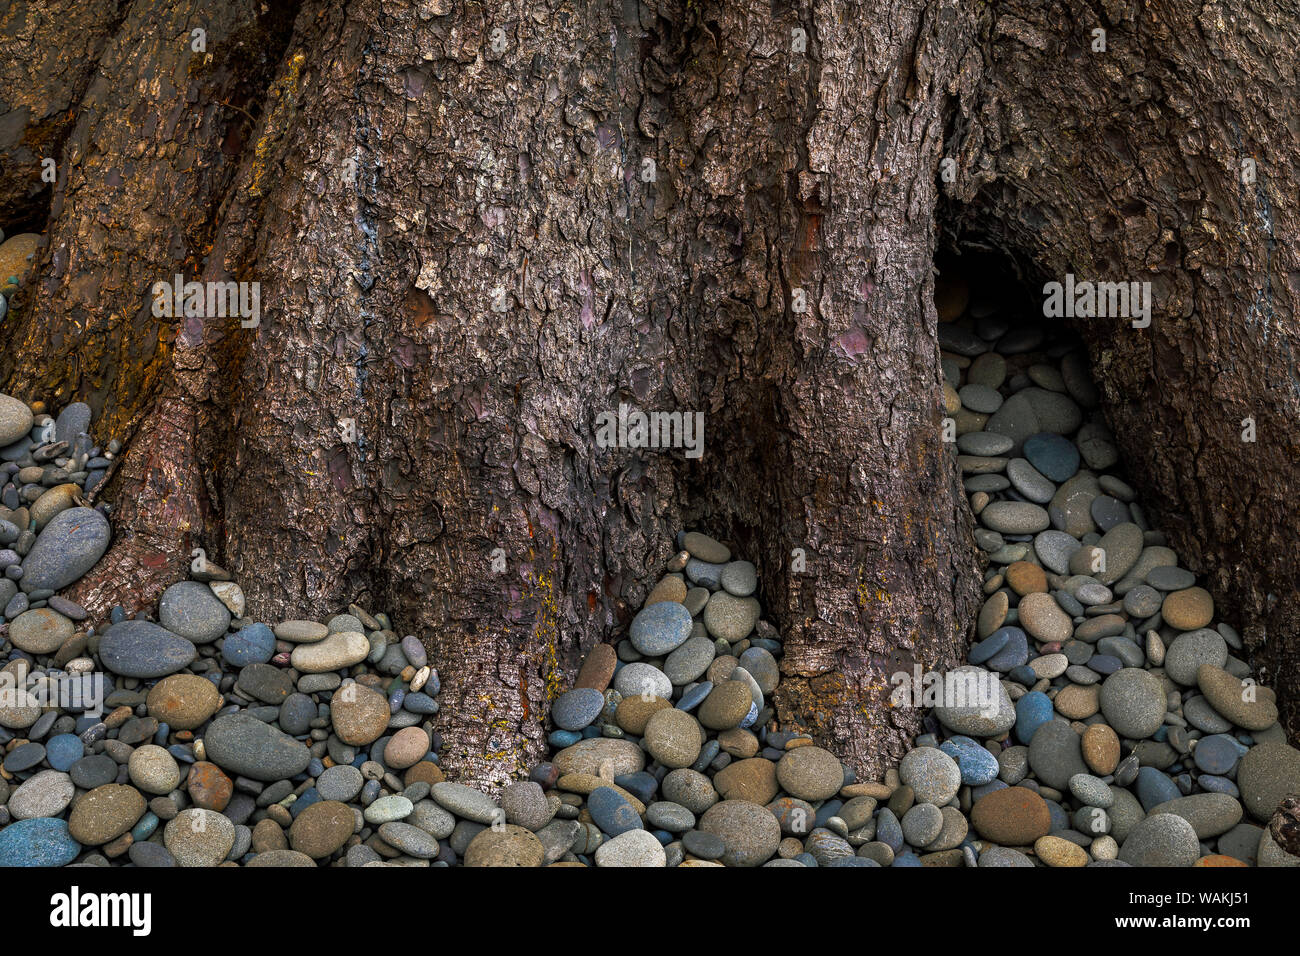 USA, Washington State, Olympic National Park. Sitka spruce and beach rocks close-up. Credit as: Don Paulson / Jaynes Gallery / DanitaDelimont.com Stock Photo